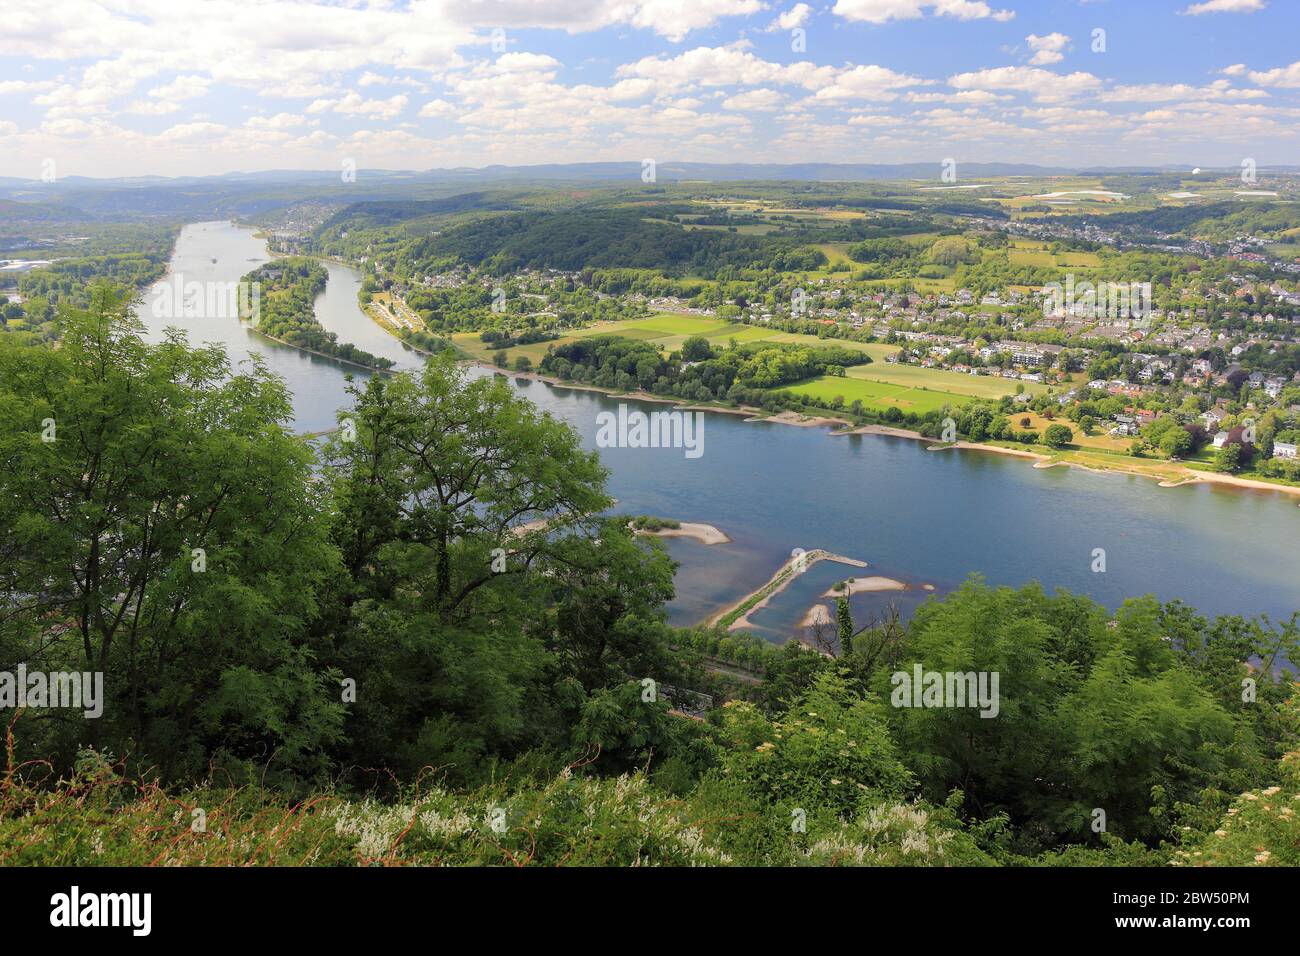 Panarama view from the Drachenfels to the river Rhine and view of Nonnenwerth Island. Bad Honnef near Bonn, Germany. Stock Photo